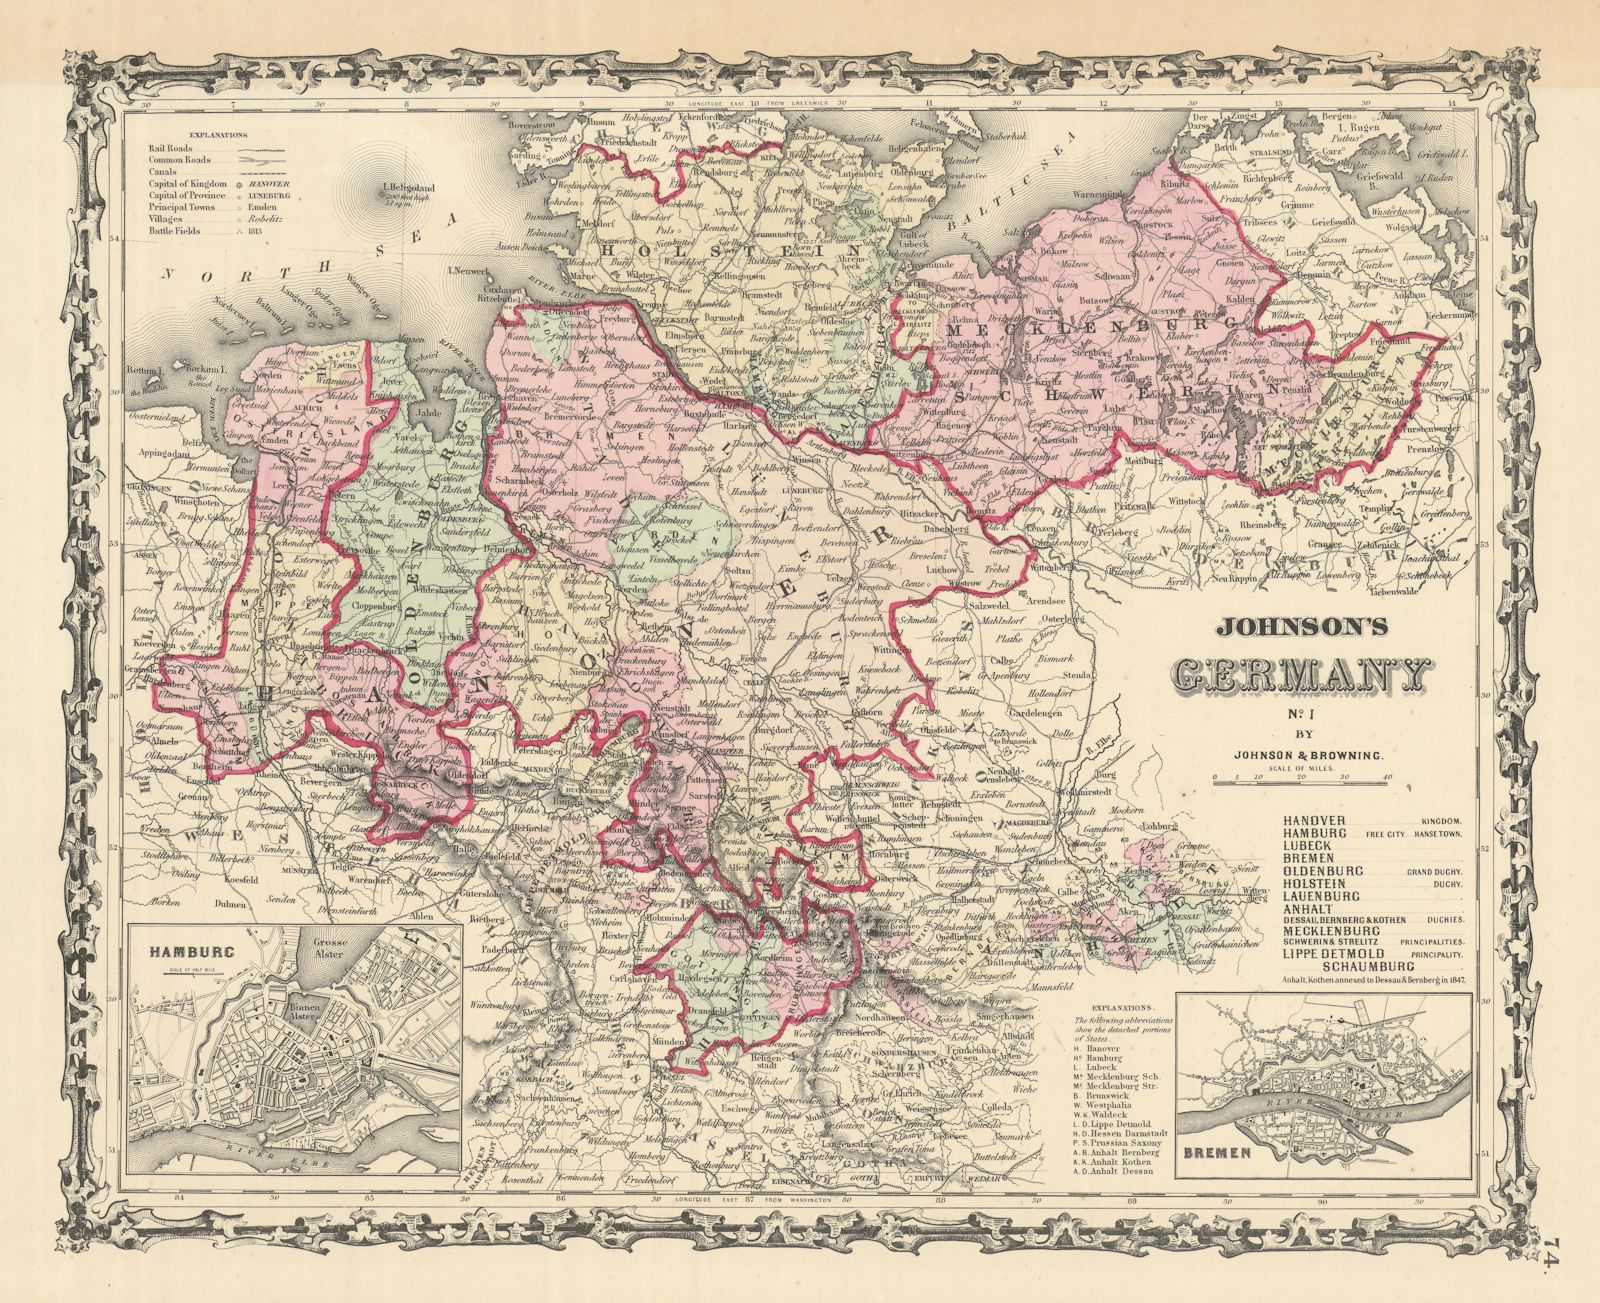 Associate Product Johnson's Germany No. 1. Northern Germany 1861 old antique map plan chart